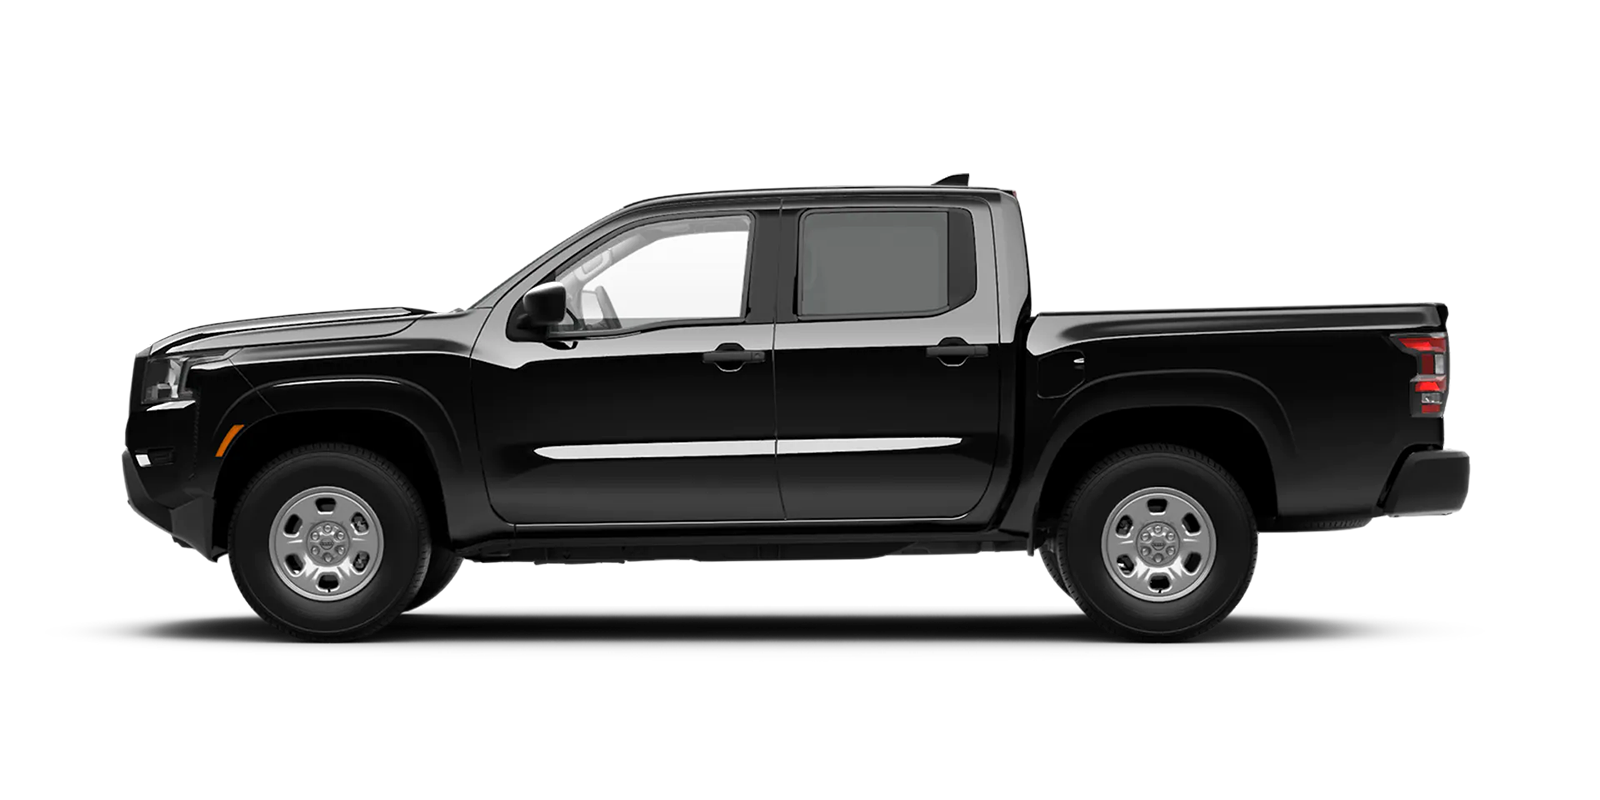 2022 Frontier Crew Cab S 4x2 in Super Black | Nationwide Nissan in Timonium MD